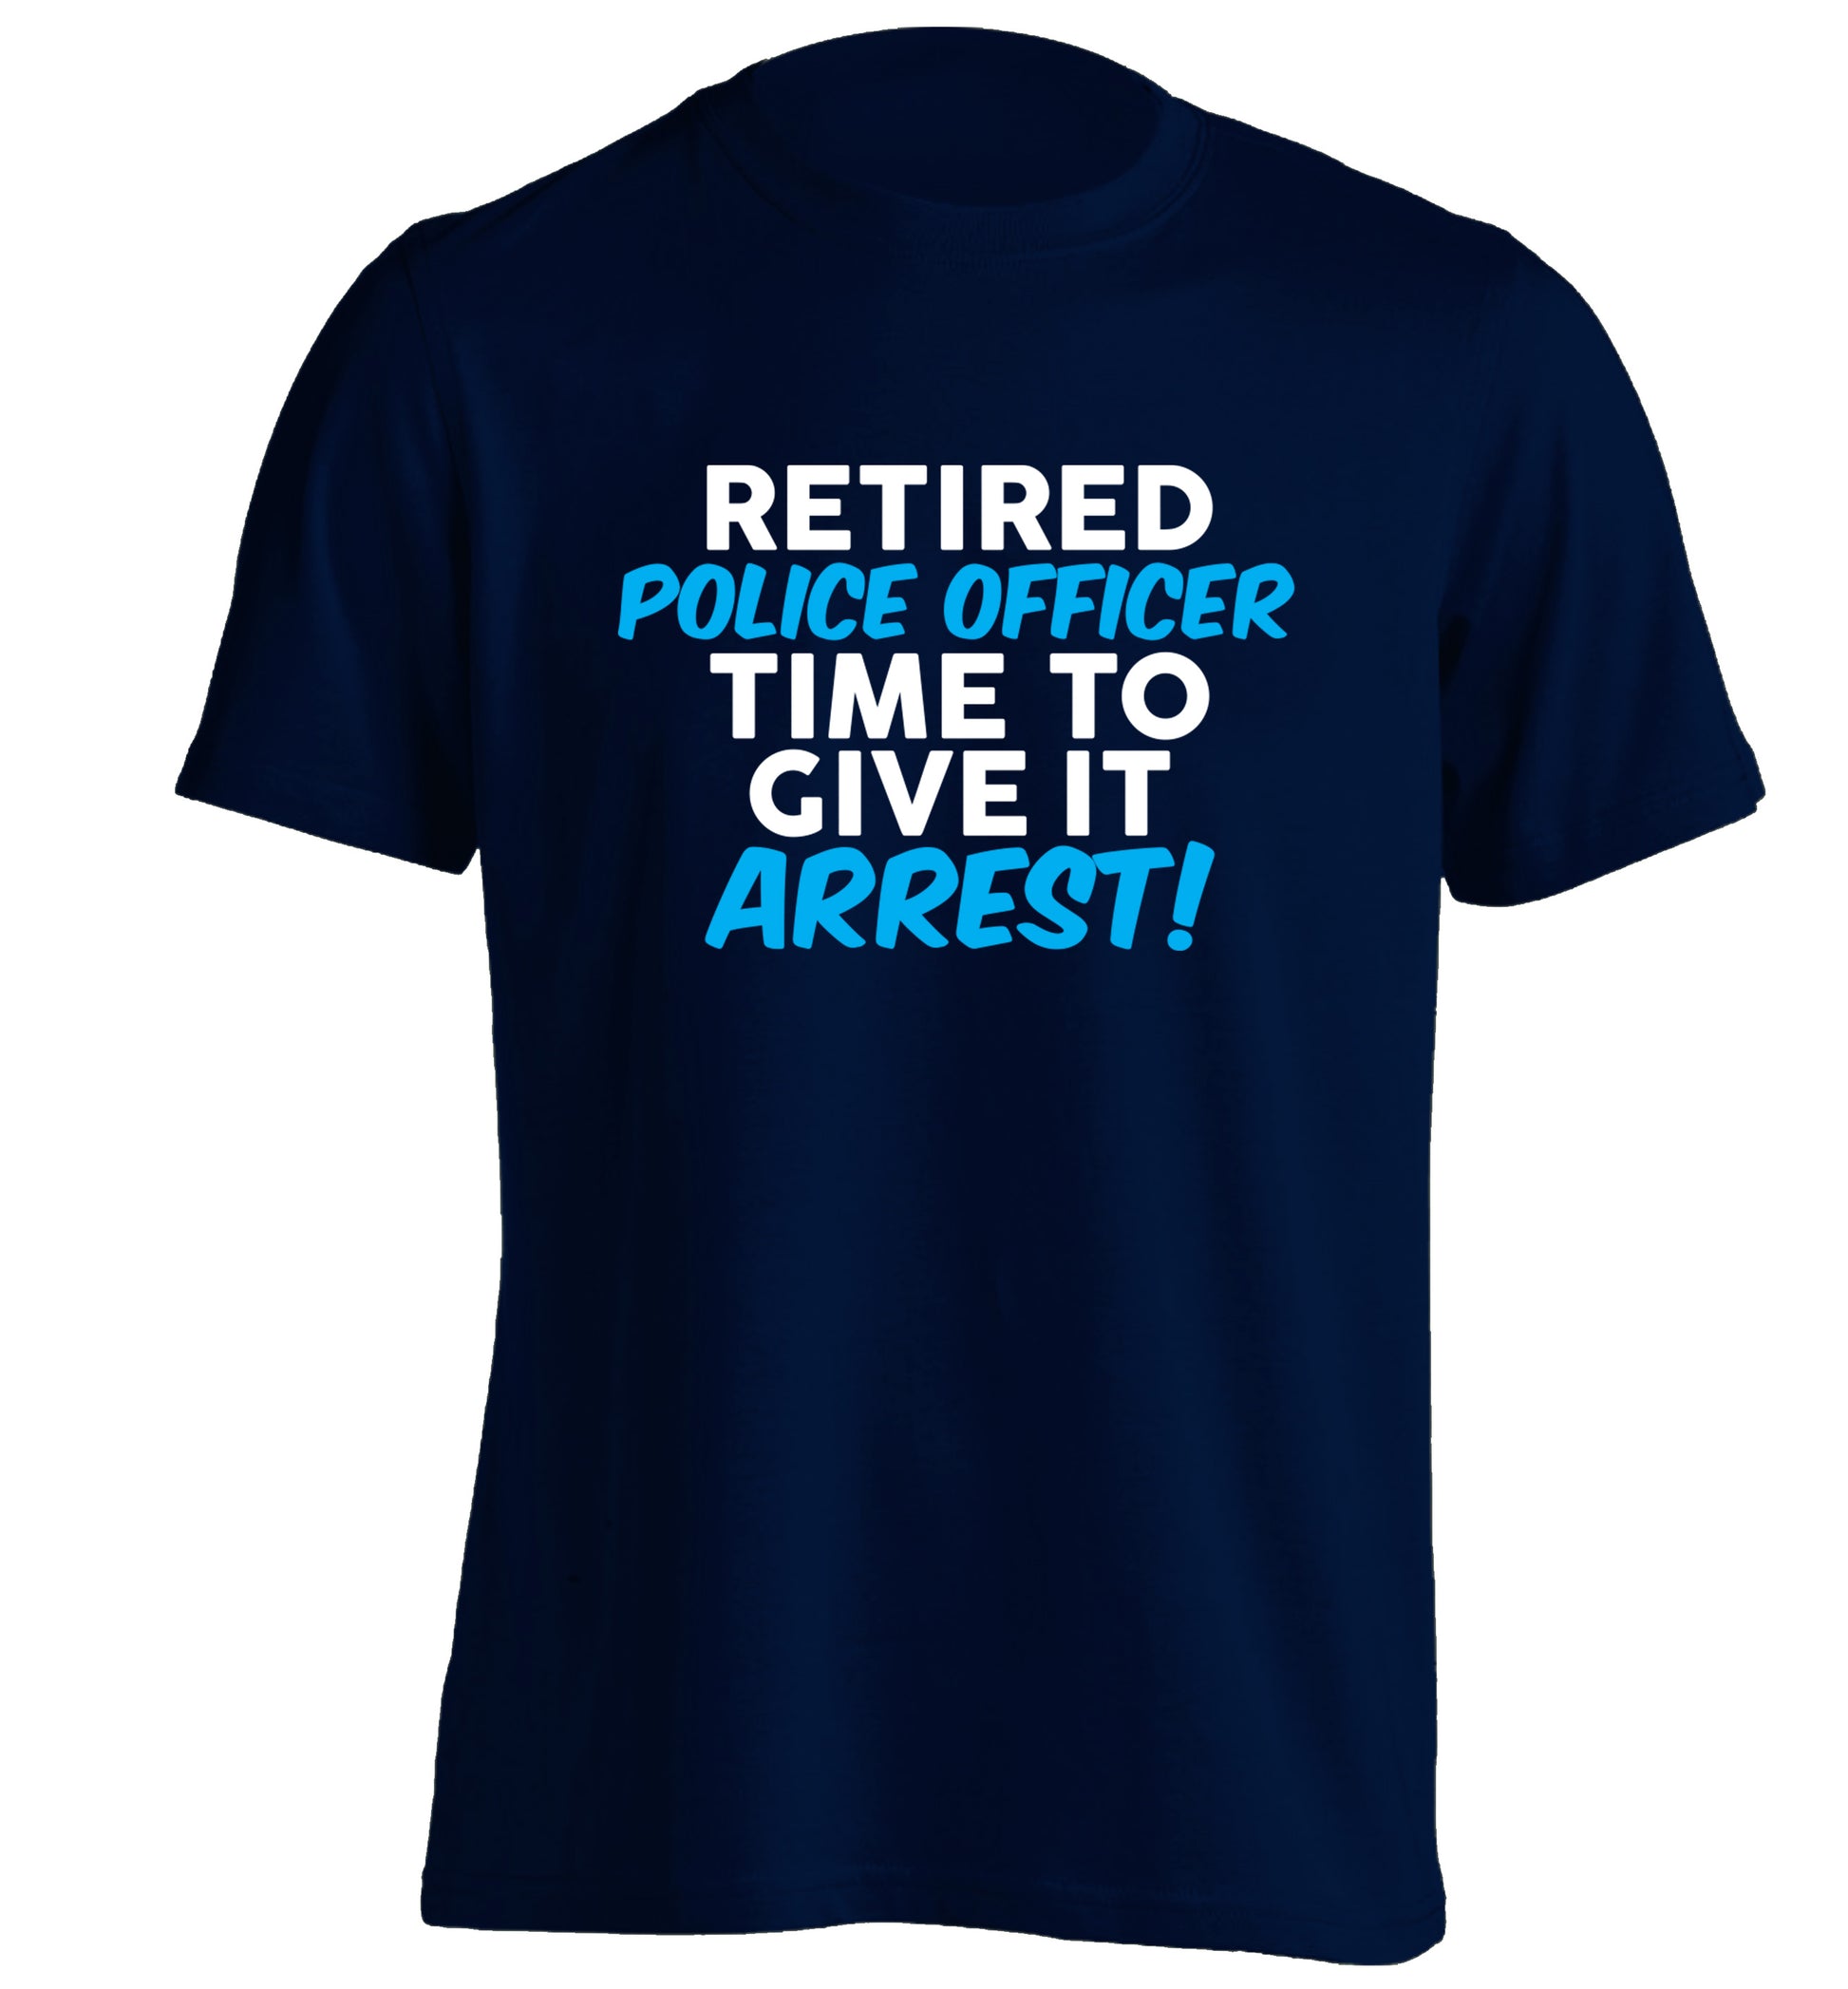 Retired police officer time to give it arrest adults unisex navy Tshirt 2XL